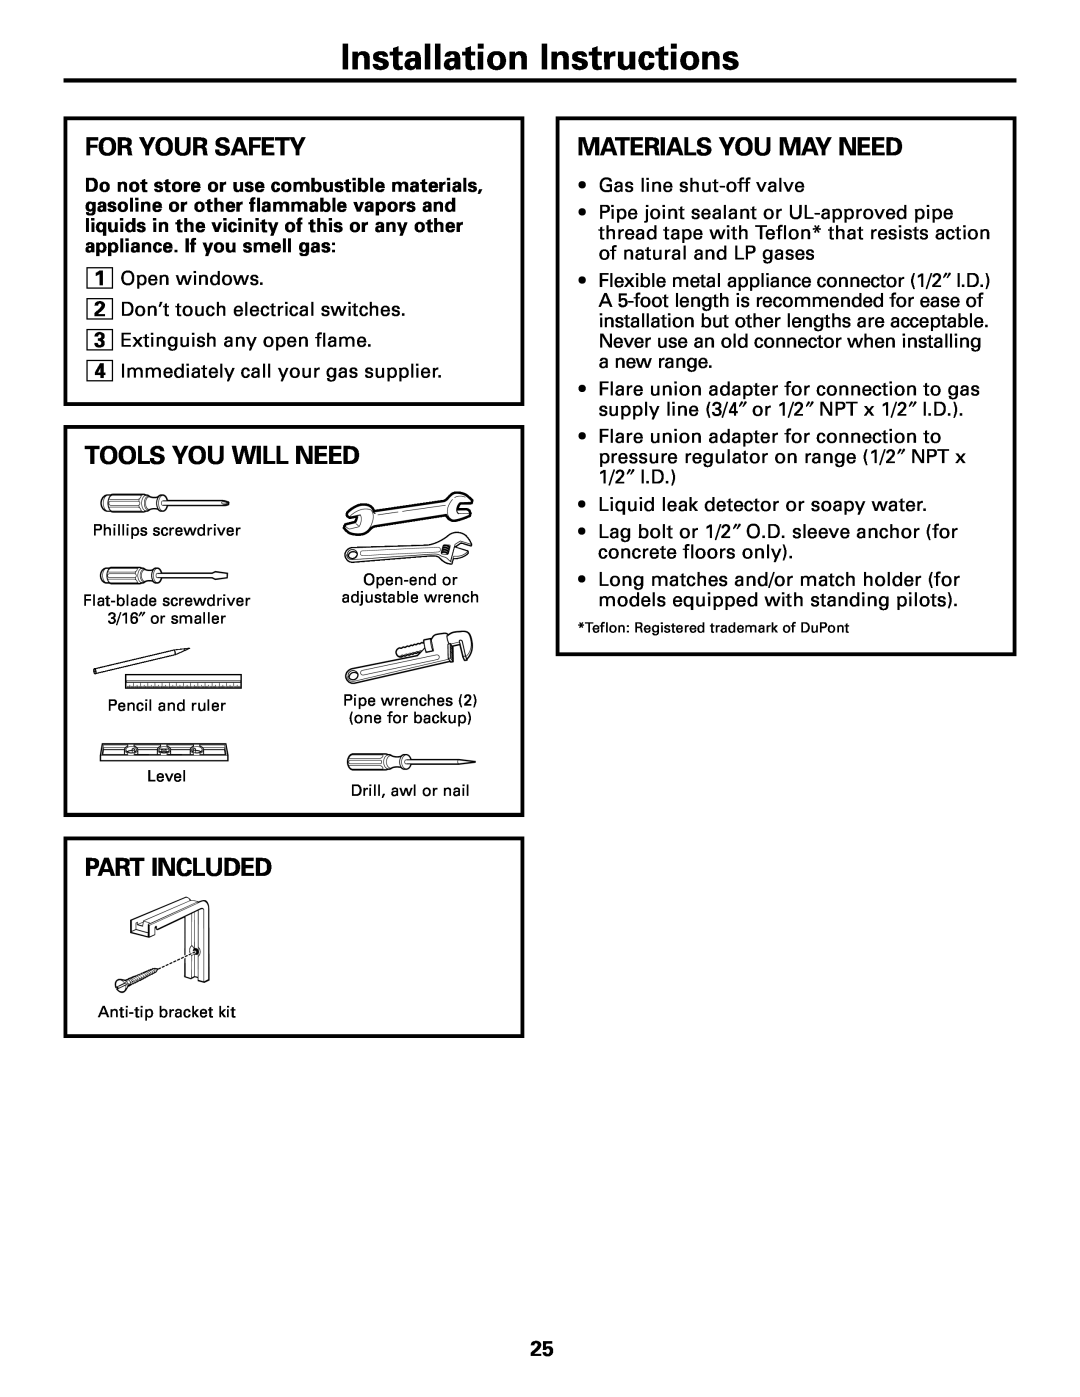 GE JGBS04, JGSS05 Installation Instructions, For Your Safety, Tools You Will Need, Part Included, Materials You May Need 